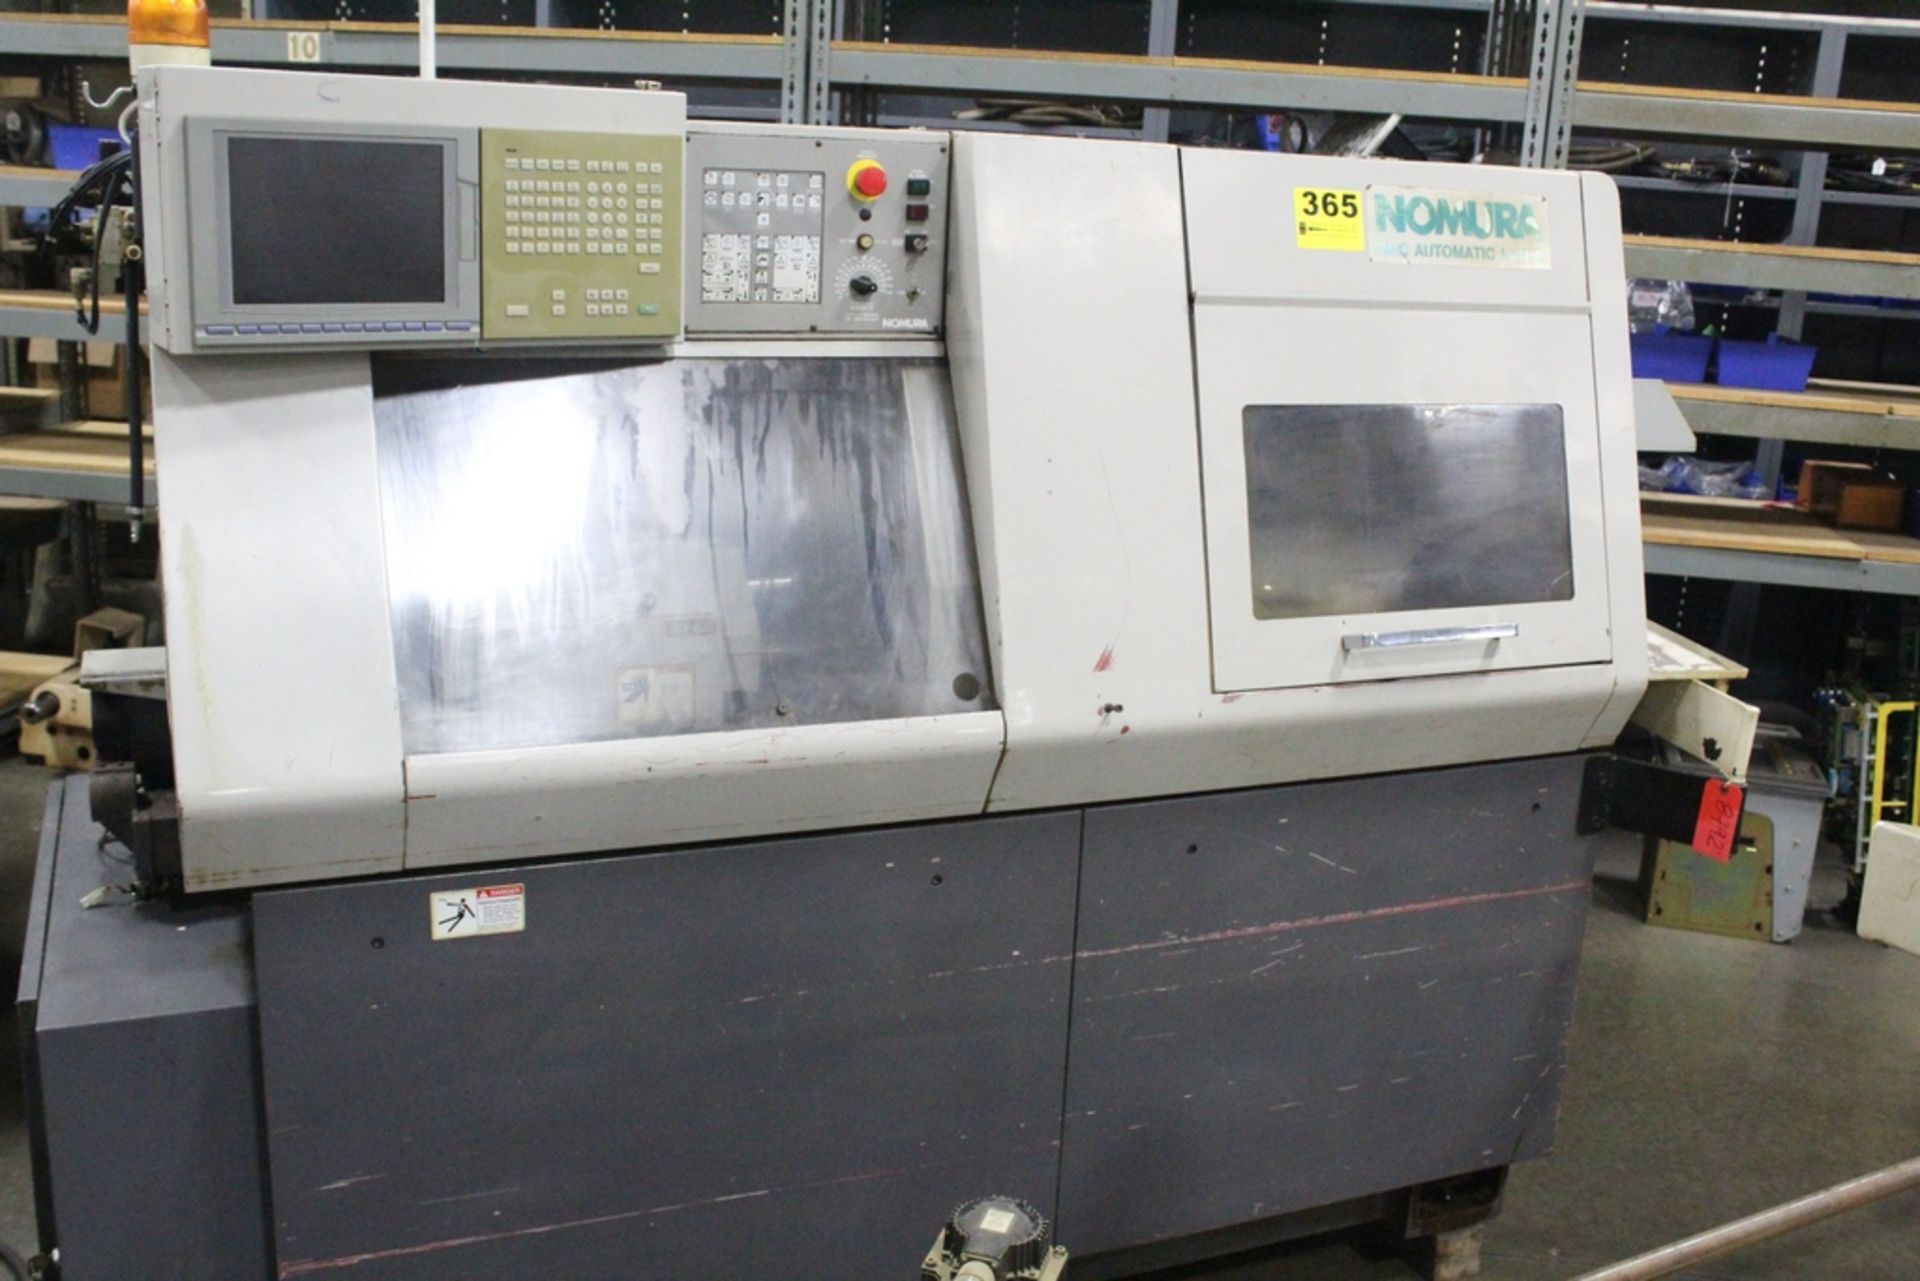 2003 NOMURA NN20B5 CNC SWISS LATHE, SUB SPINDLE, LIVE TOOLING, SN: 25080301, 20-MM, 6-AXIS, 200-MM